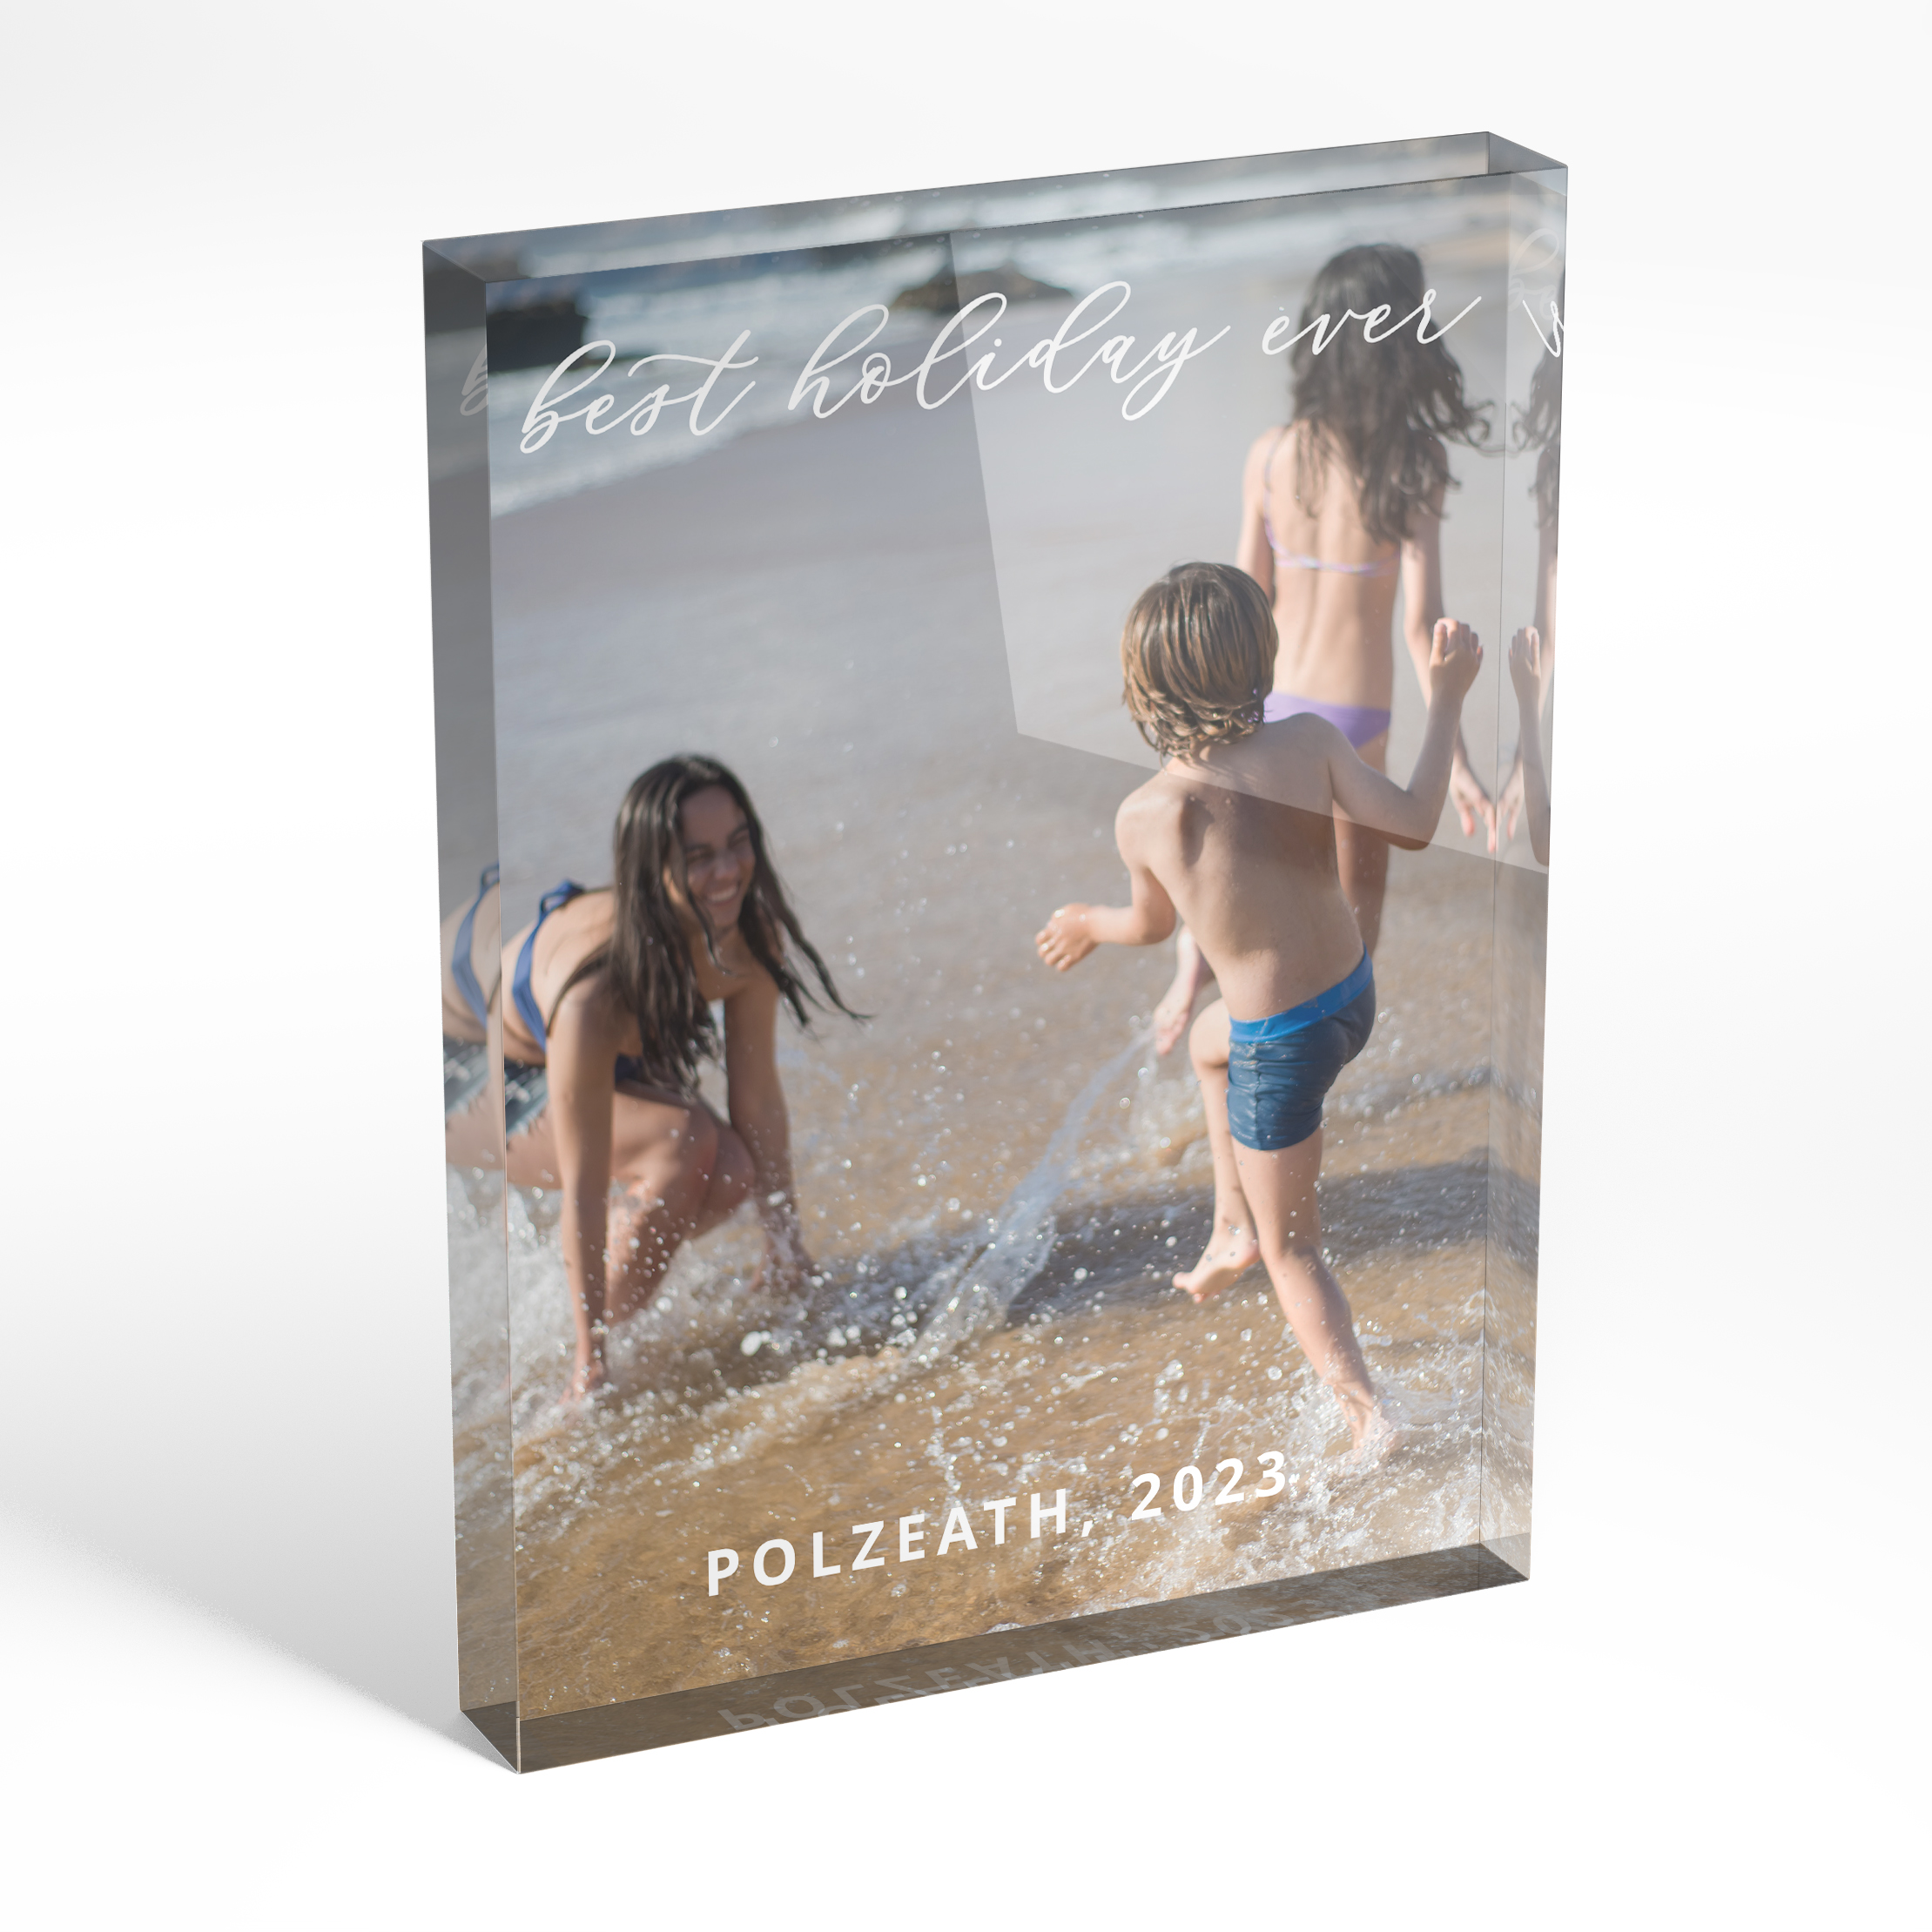 An angled side view of a portrait layout Online acrylic photo blocks with space for 1 photo. Thiis design is named "Best holiday ever". 